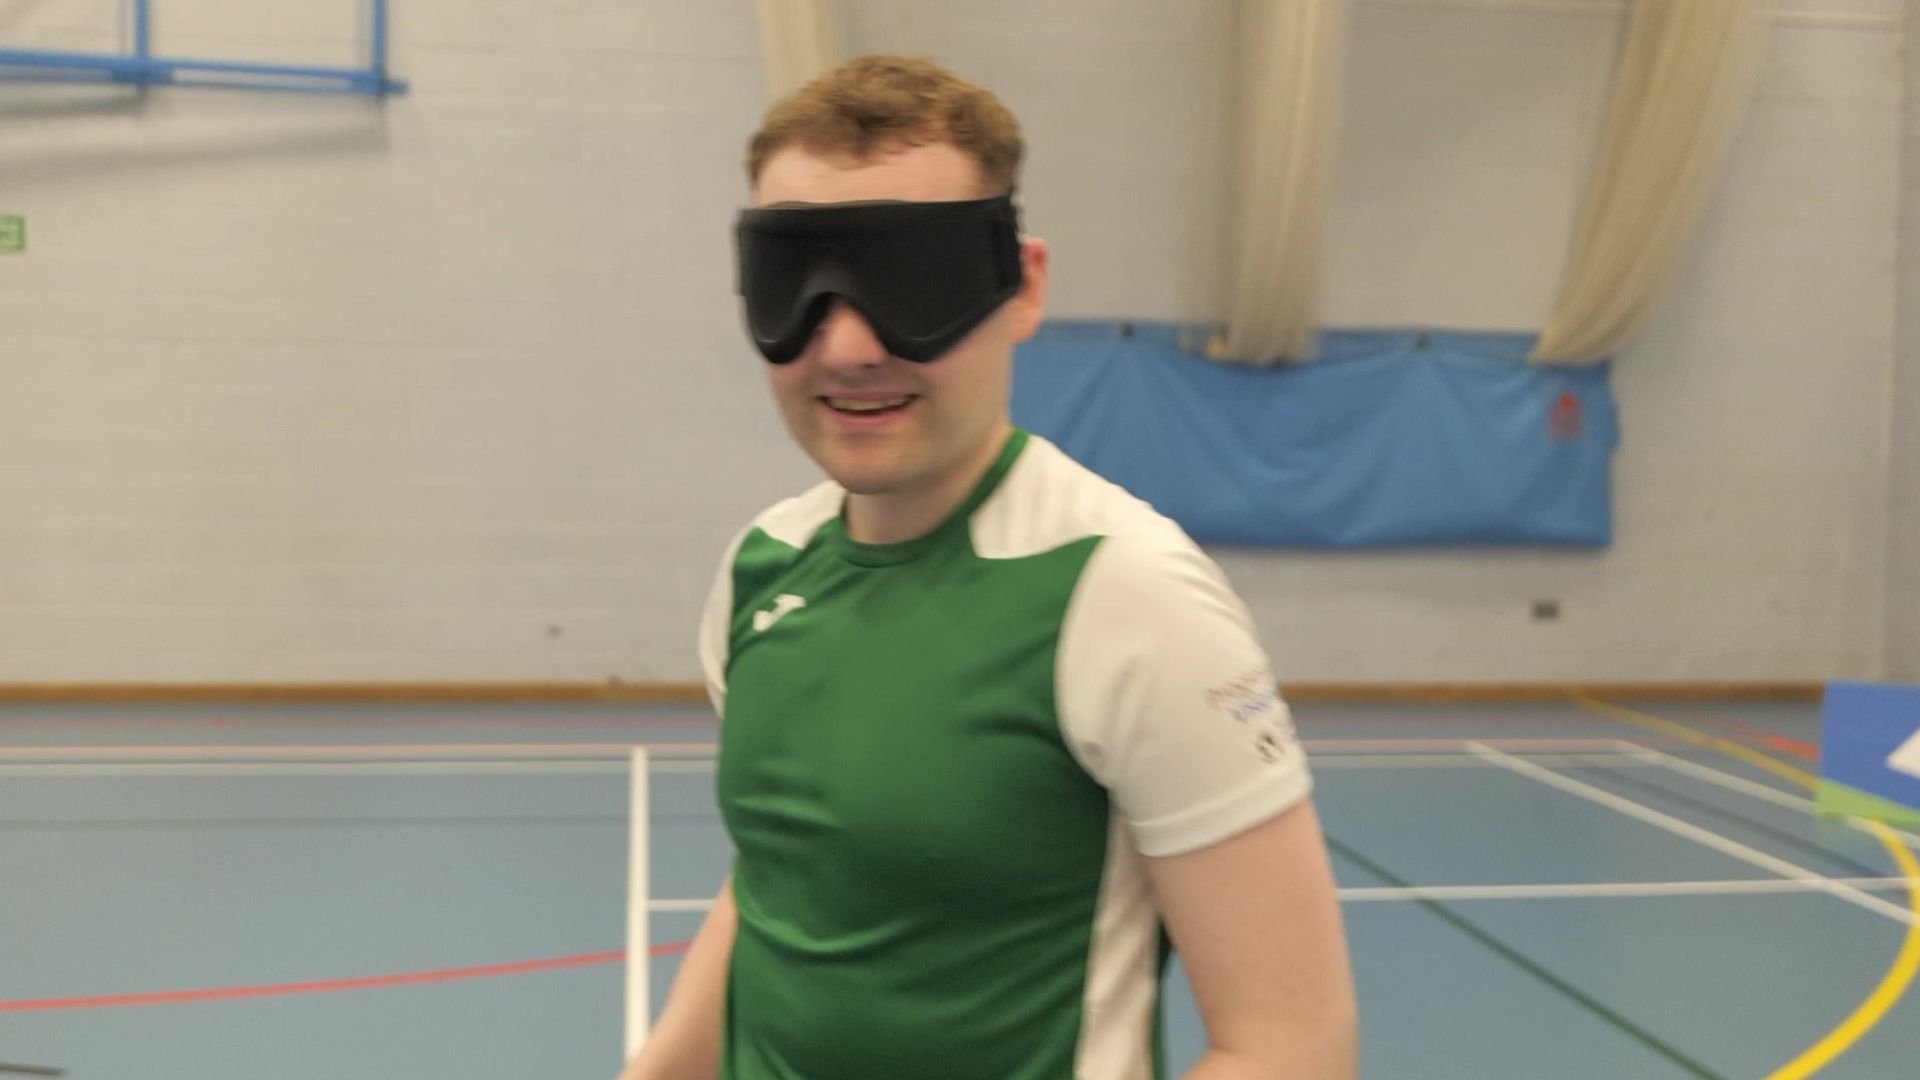 What is visually impaired tennis and how is it changing lives?